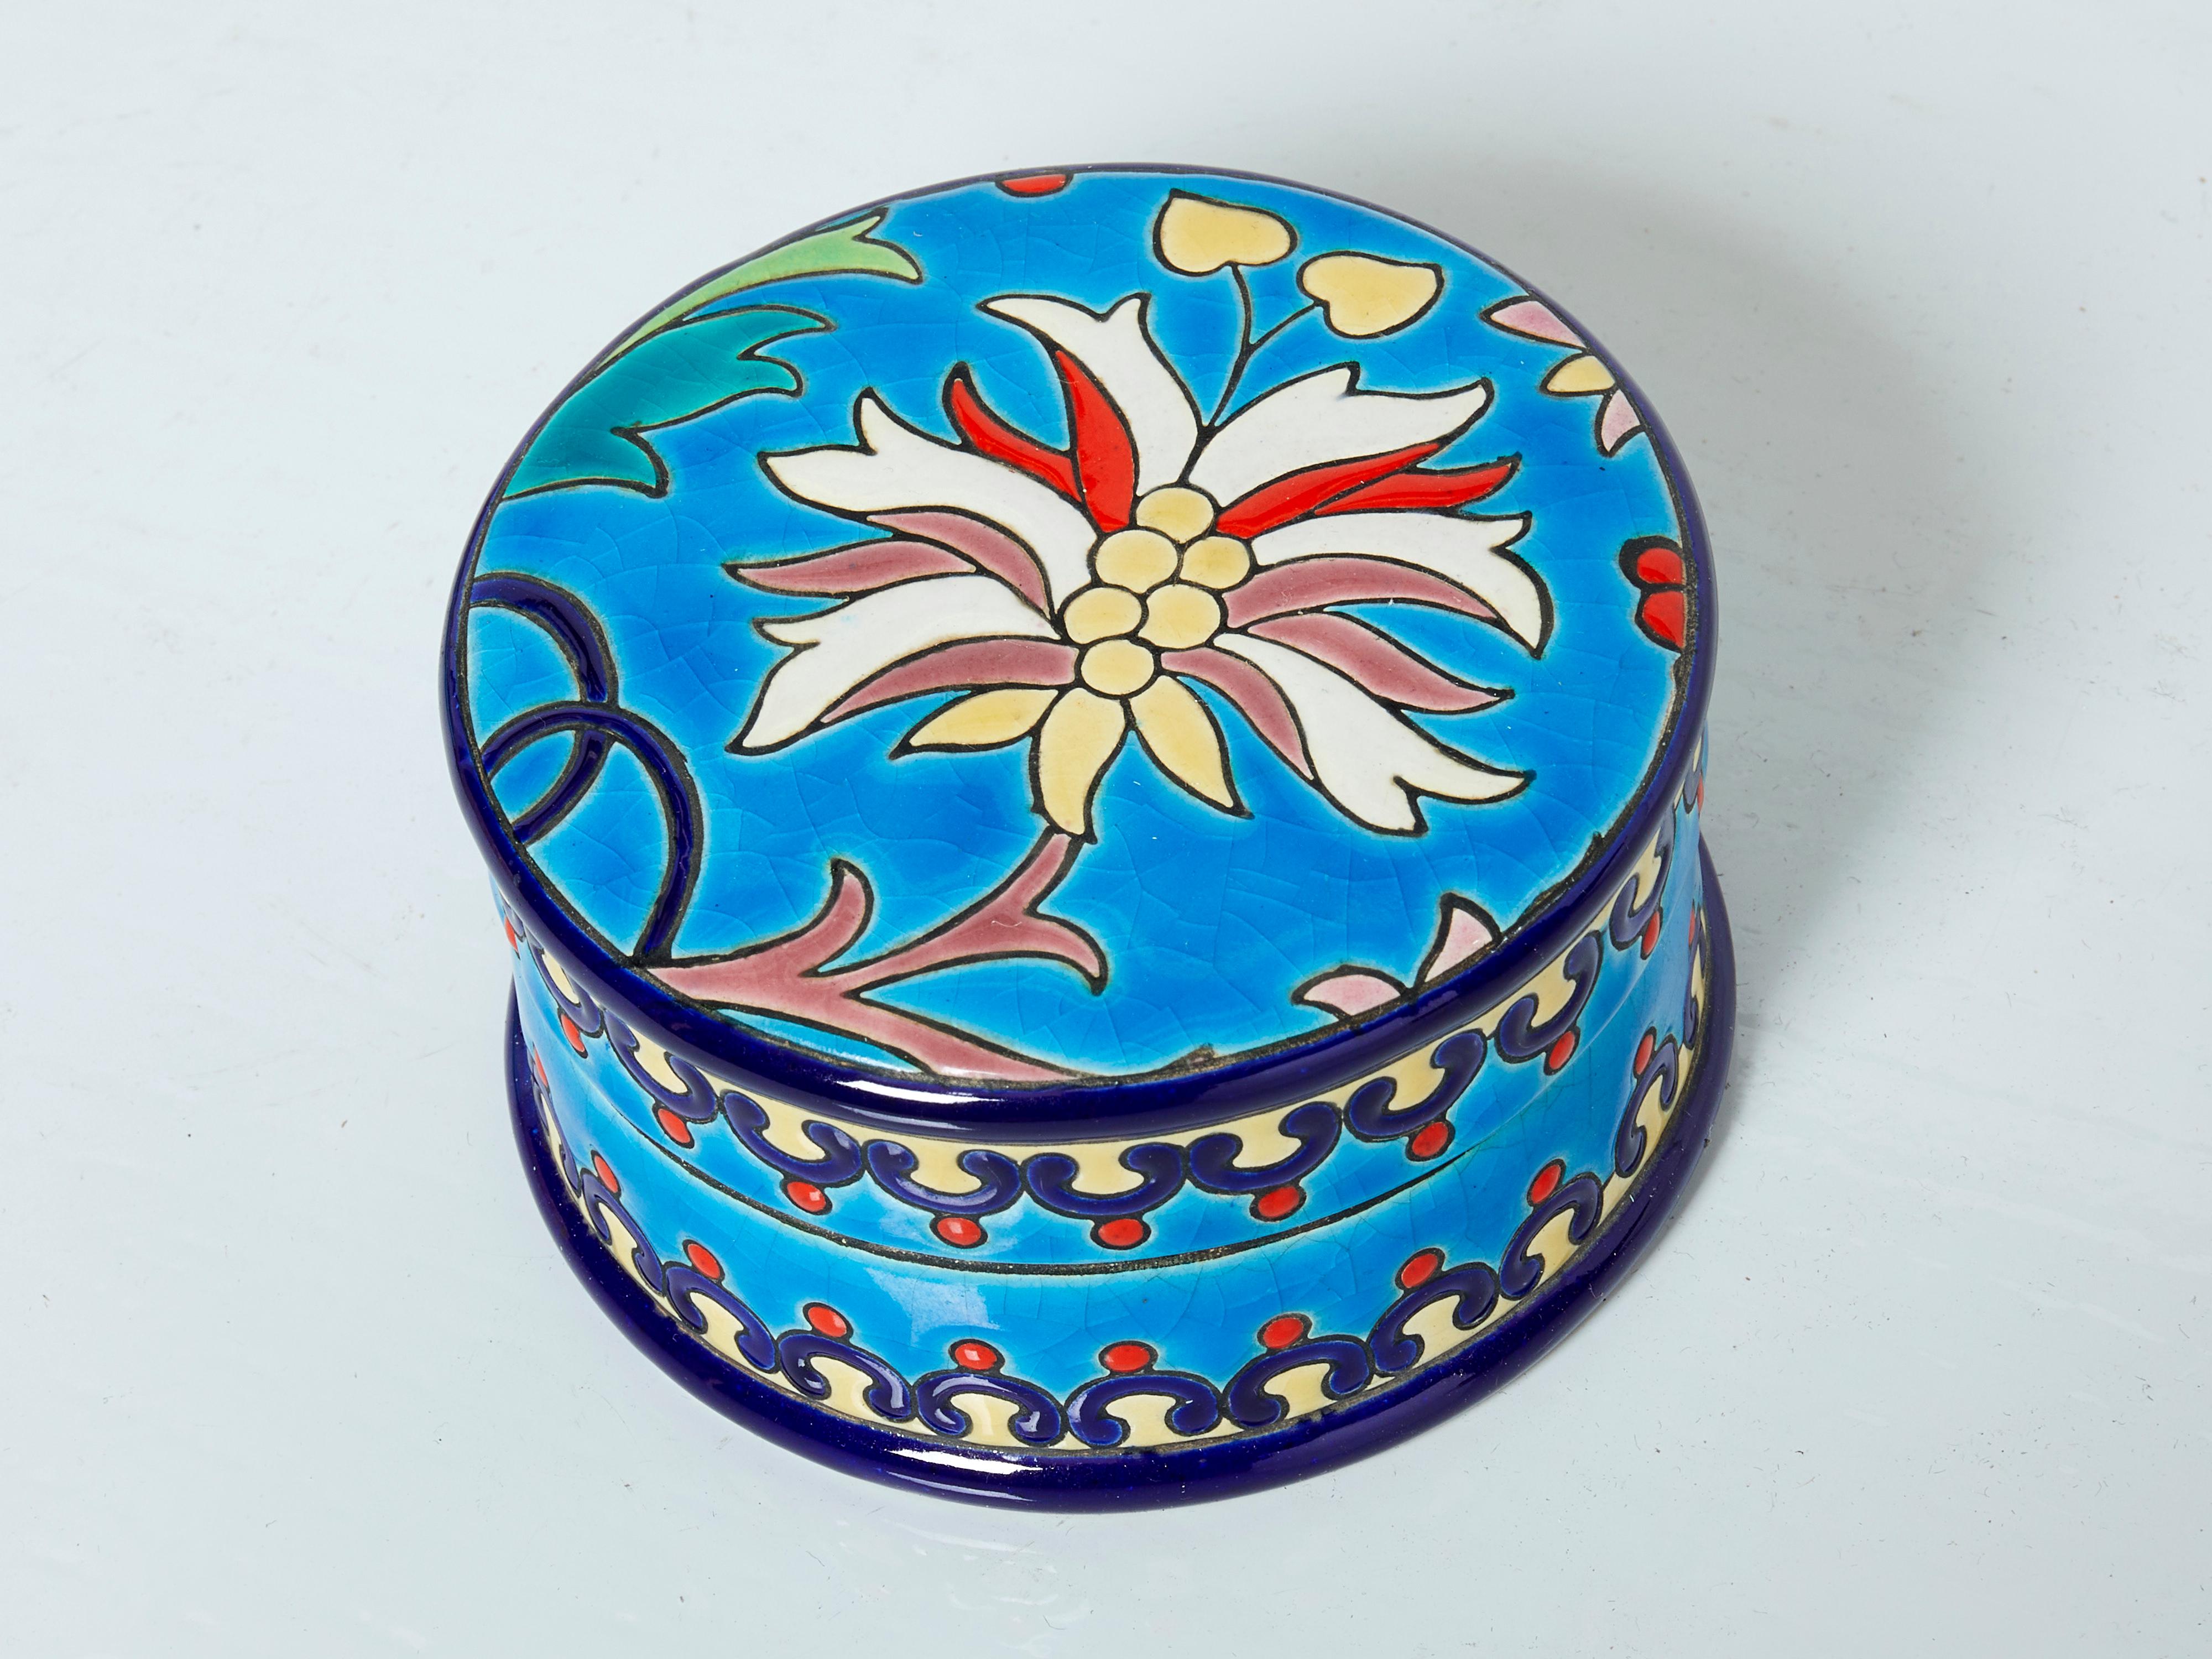 Colourful small ceramic Art Deco round box by Faïenceries et Emaux de Longwy made around 1940. This turquoise blue box features a colourful frieze with a beautiful flower on the top, and Longwy's signature craquelure glaze. The Longwy manufacture